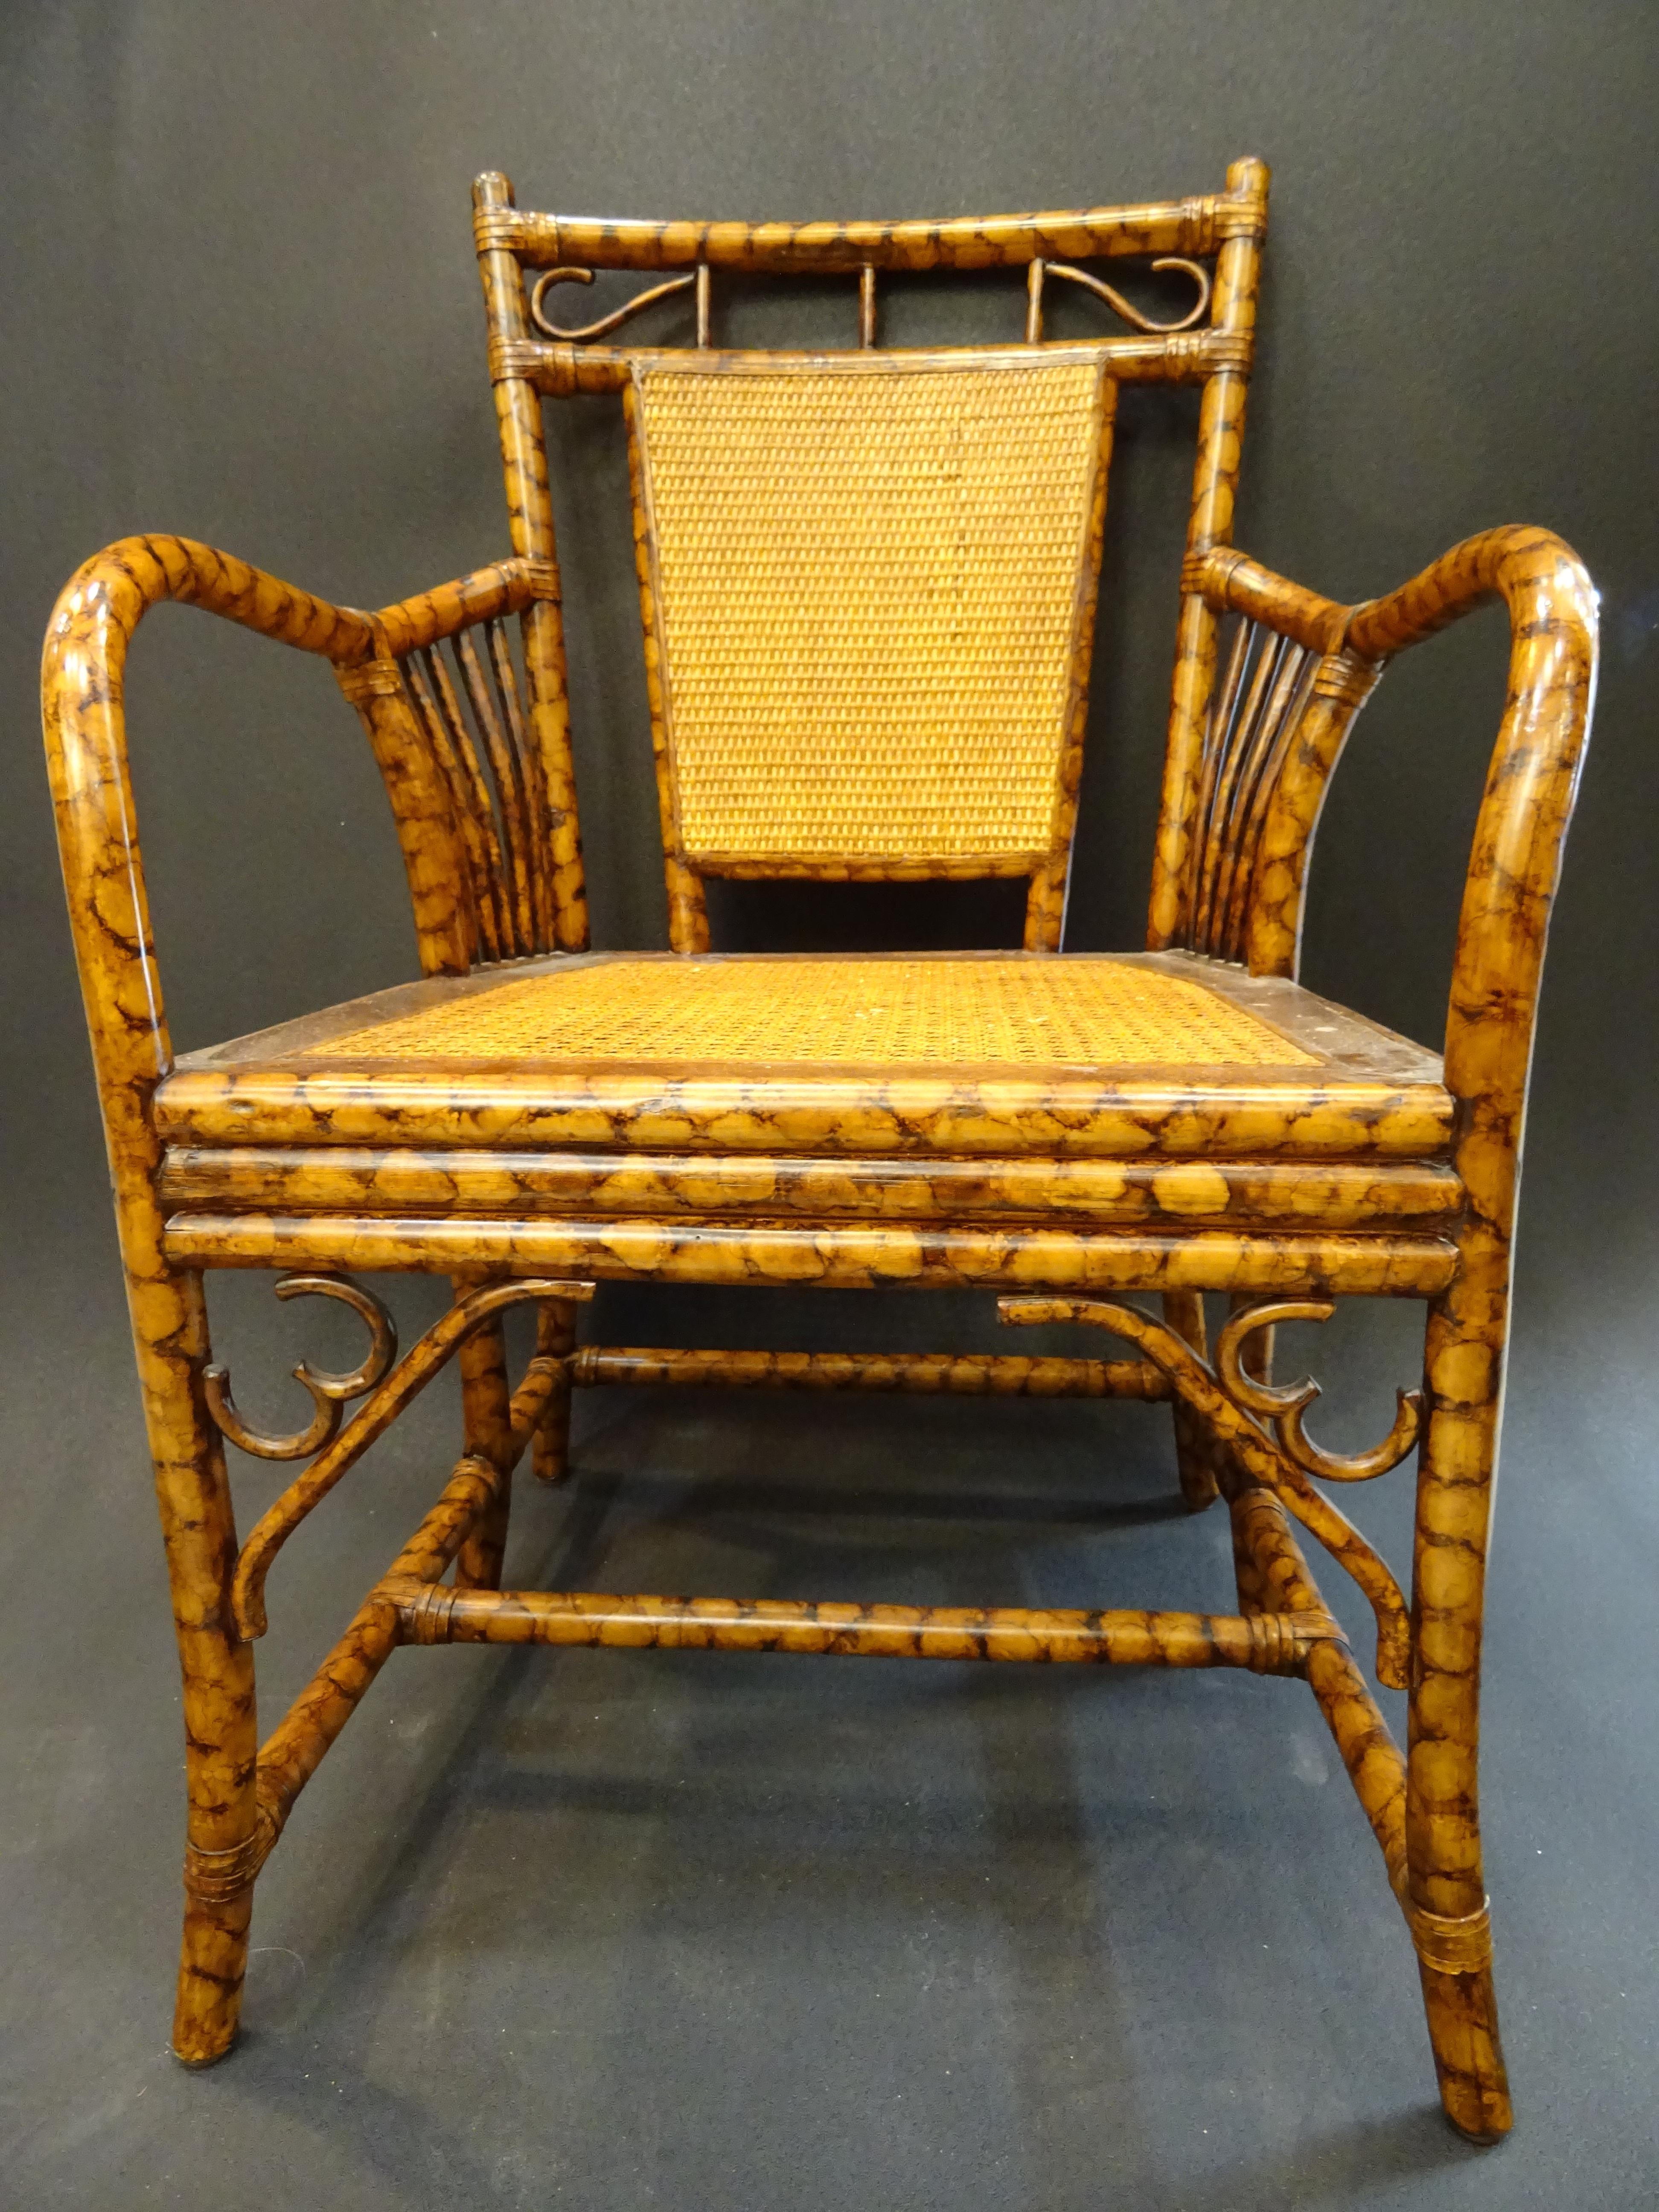 Stunning and lovely English Arts & Crafts armchair, in bamboo simulating root wood and rattan. In a very good condition with age and use.
It was purchased in a private collection in Geneva Switzerland.
Its a very cozy piece to put in a closed